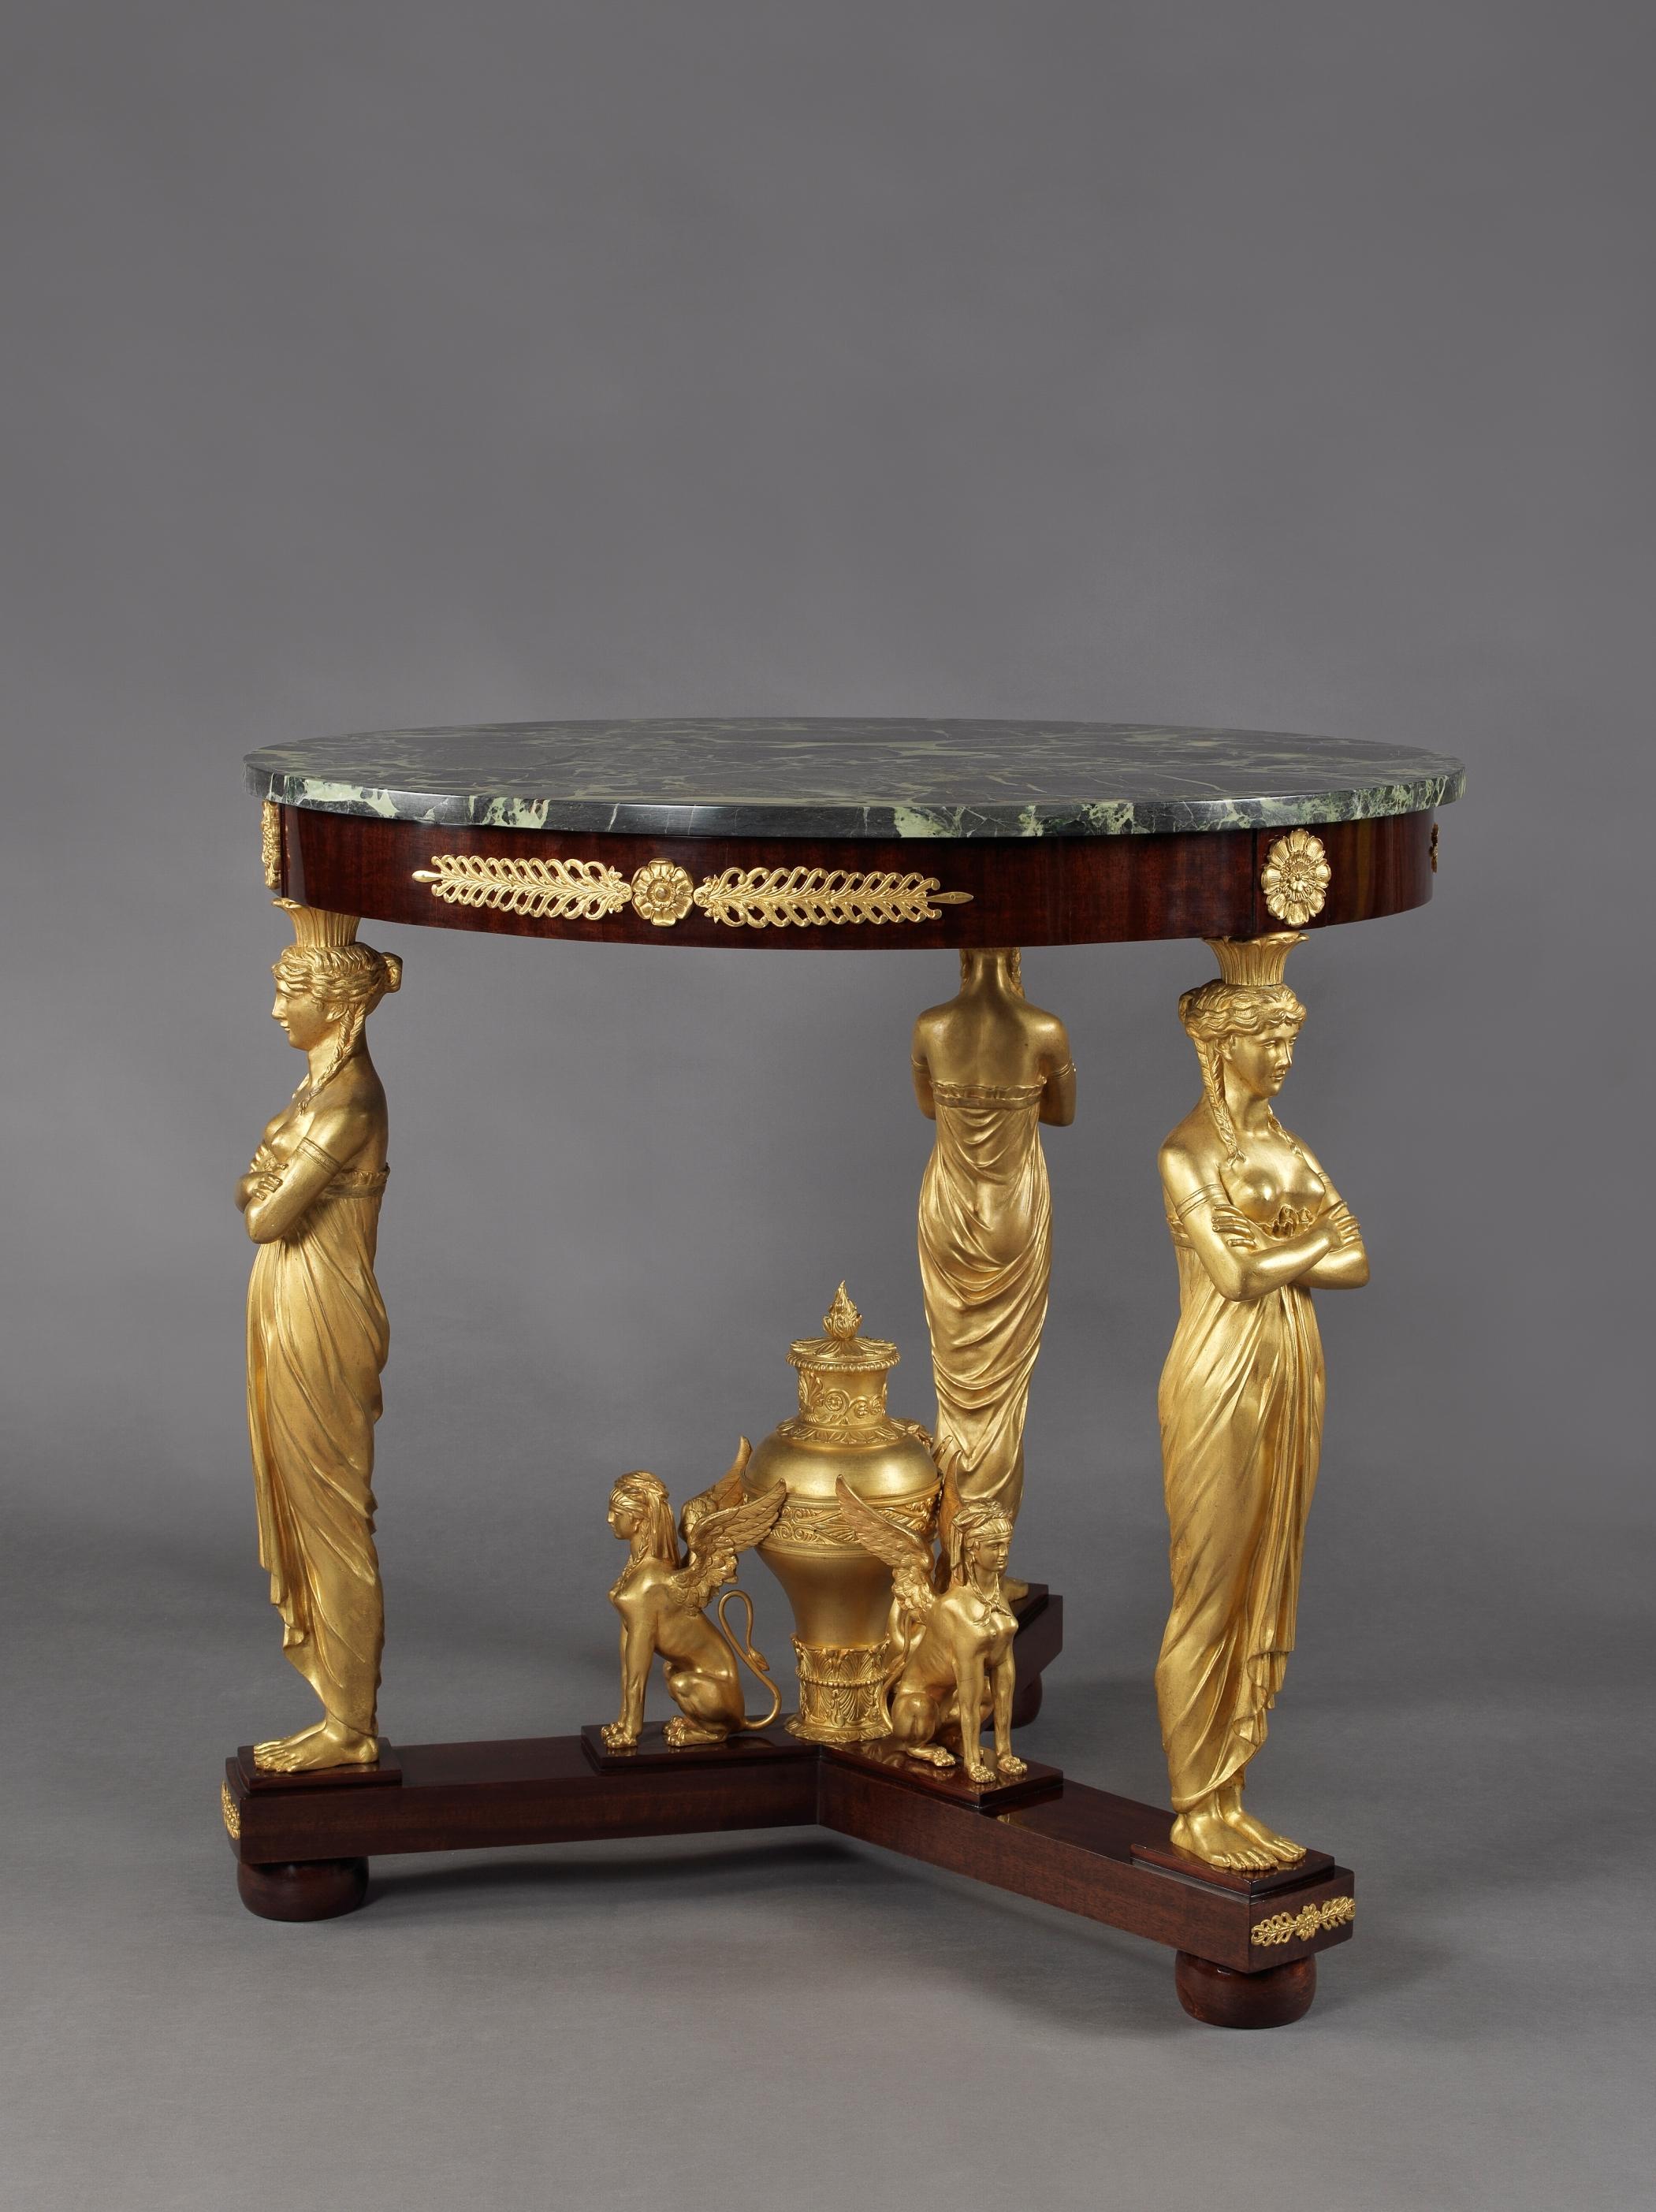 A fine Empire style gilt-bronze and mahogany gueridon, with a Verde antico marble top, in the manner of Jacob-Desmalter. 

French, circa 1880. 

The circular Verde antico marble top above a mahogany frieze with rosettes and palmette mounts